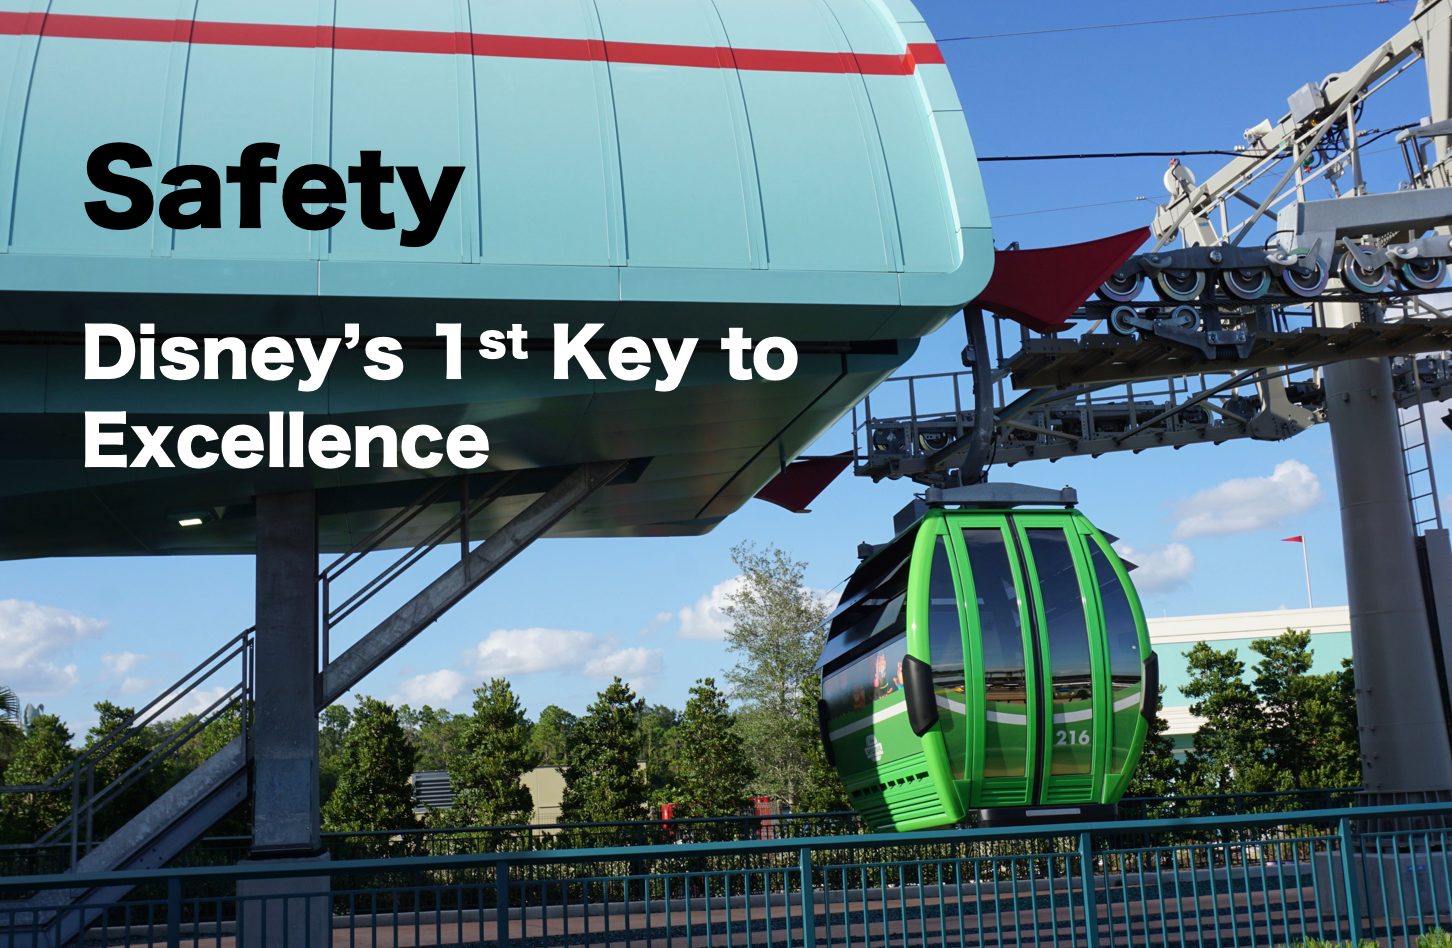 Safety: Disney's 1st Key to Excellence